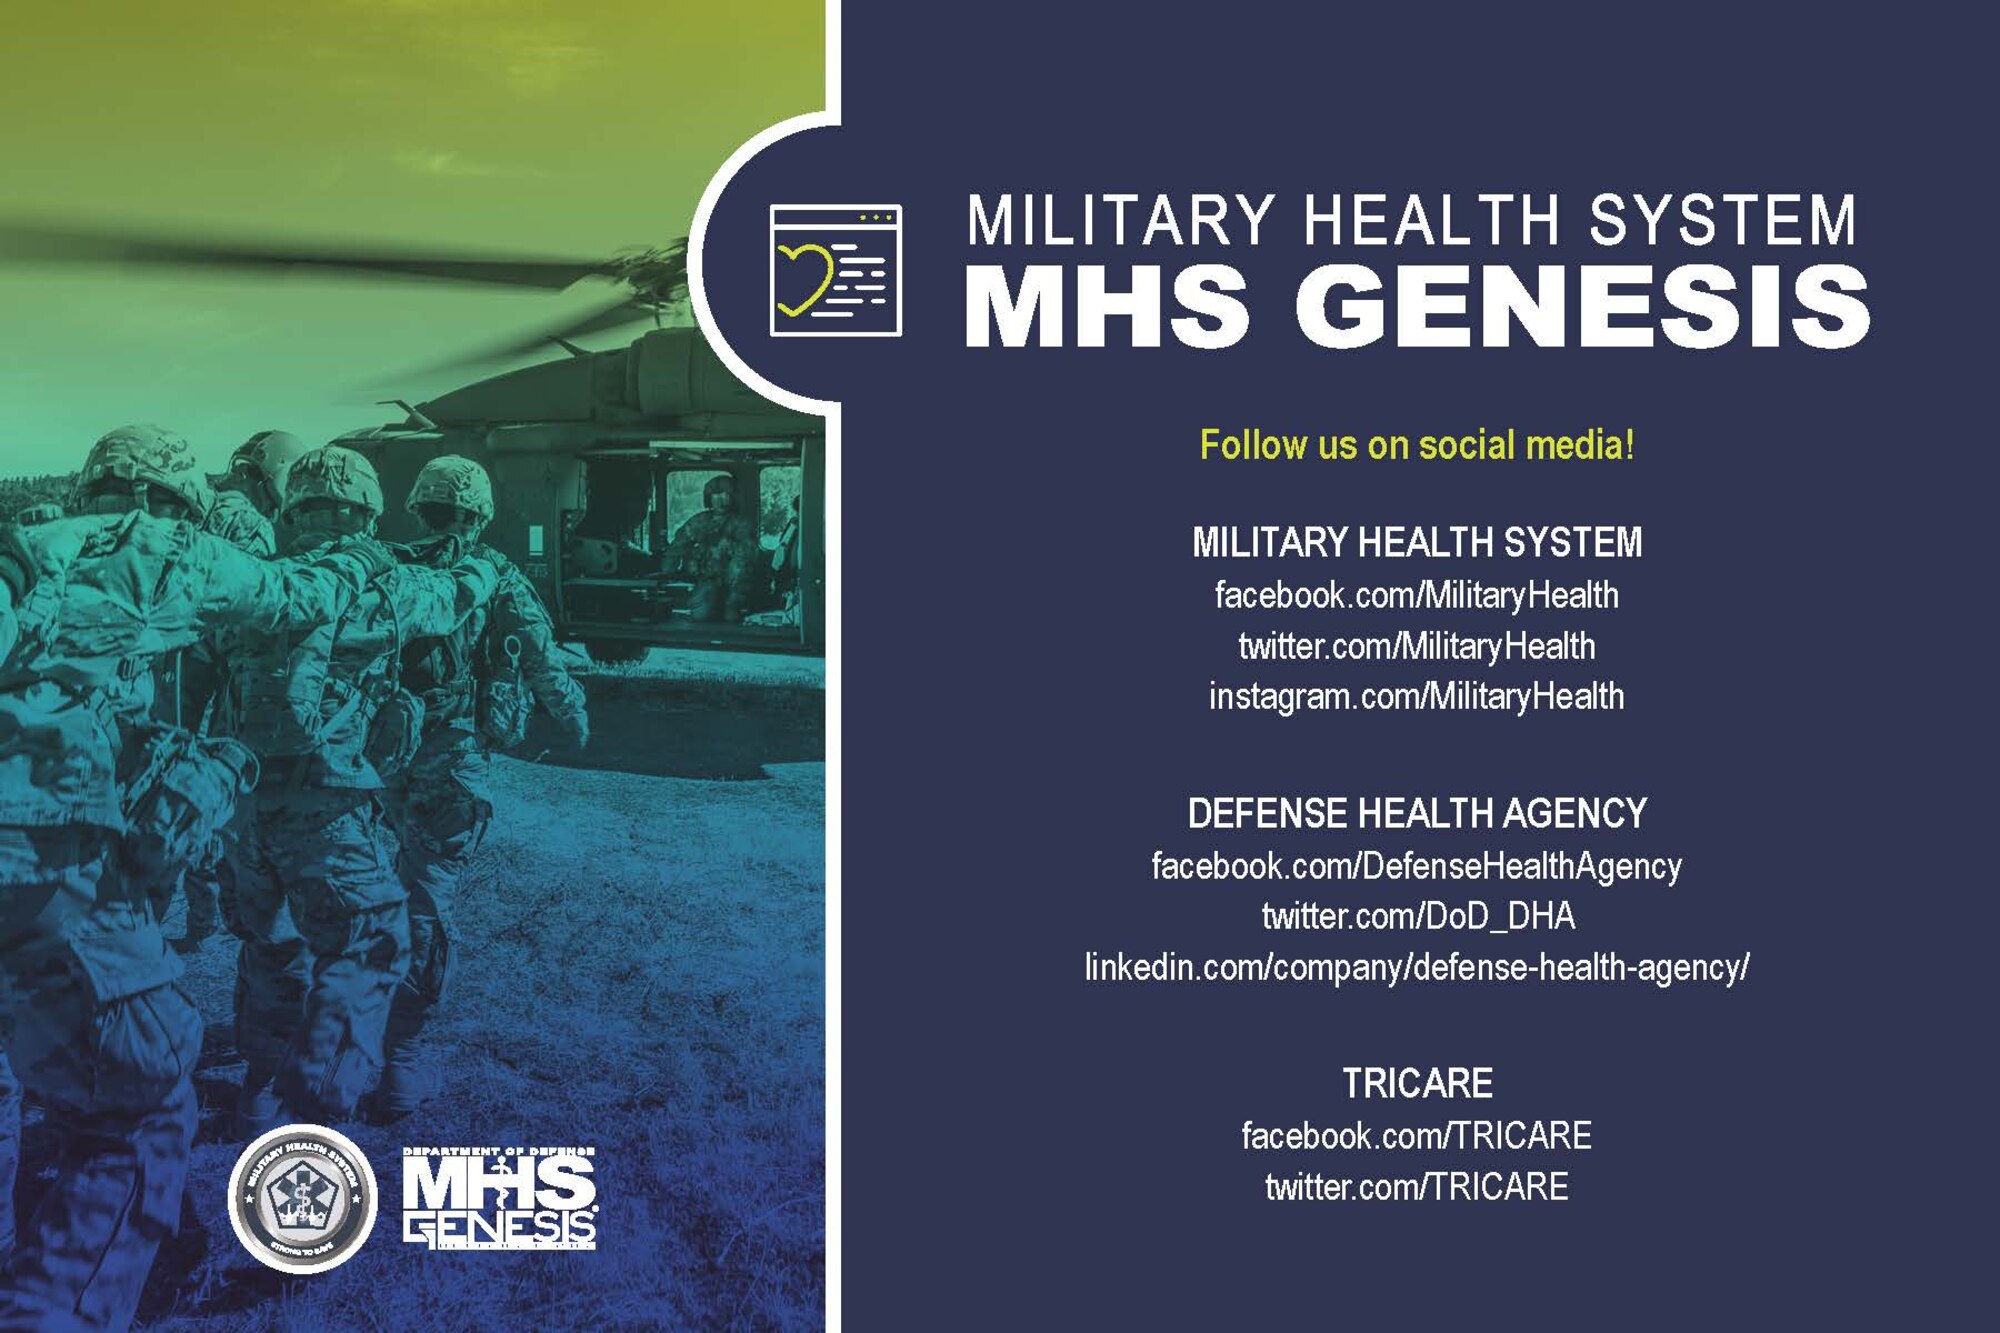 -	MHS GENESIS is the new electronic health record (EHR) for the Military Health System. It is the single, continuous record of care that will support the provision and coordination of care for 9.5 million TRICARE (i.e., service members, retirees, and family members) beneficiaries worldwide. Full deployment of MHS GENESIS, in all military hospitals and clinics, is expected to be complete by 2023.